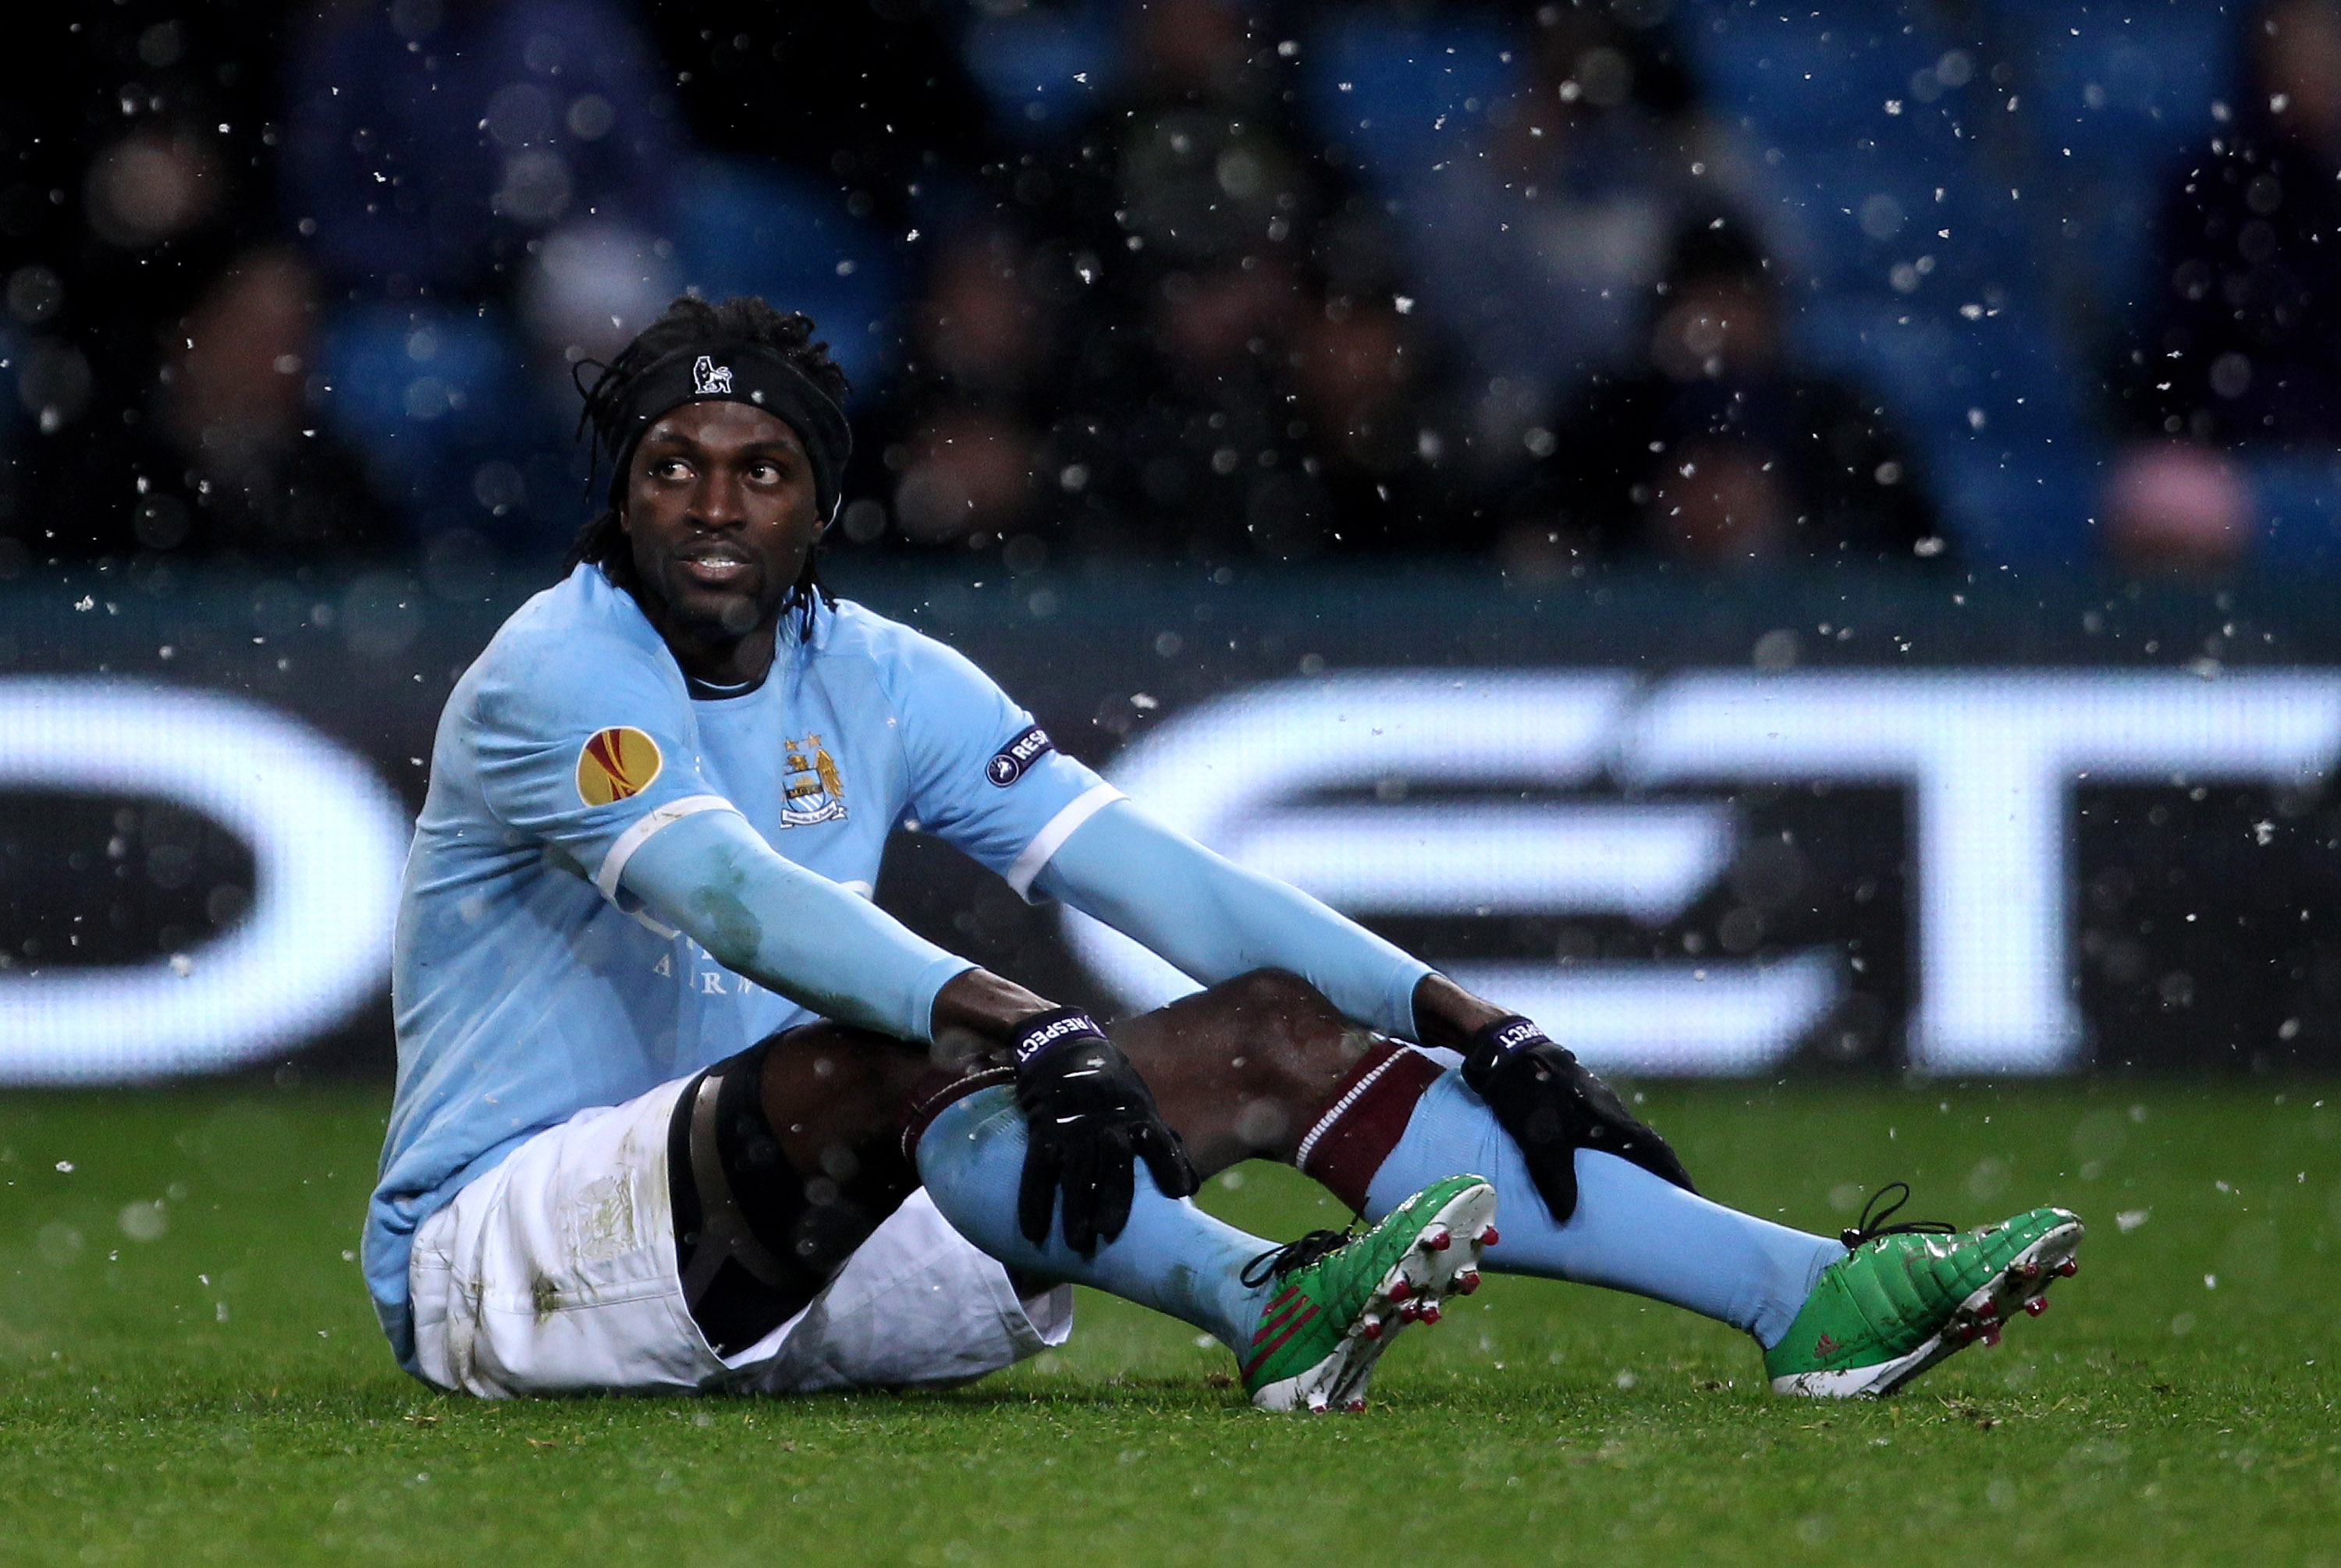 MANCHESTER, ENGLAND - DECEMBER 01:   Emmanuel Adebayor of Manchester City looks on during the UEFA Europa League Group A match between Manchester City and FC Salzburg at the City of Manchester Stadium on December 1, 2010 in Manchester, England. (Photo by